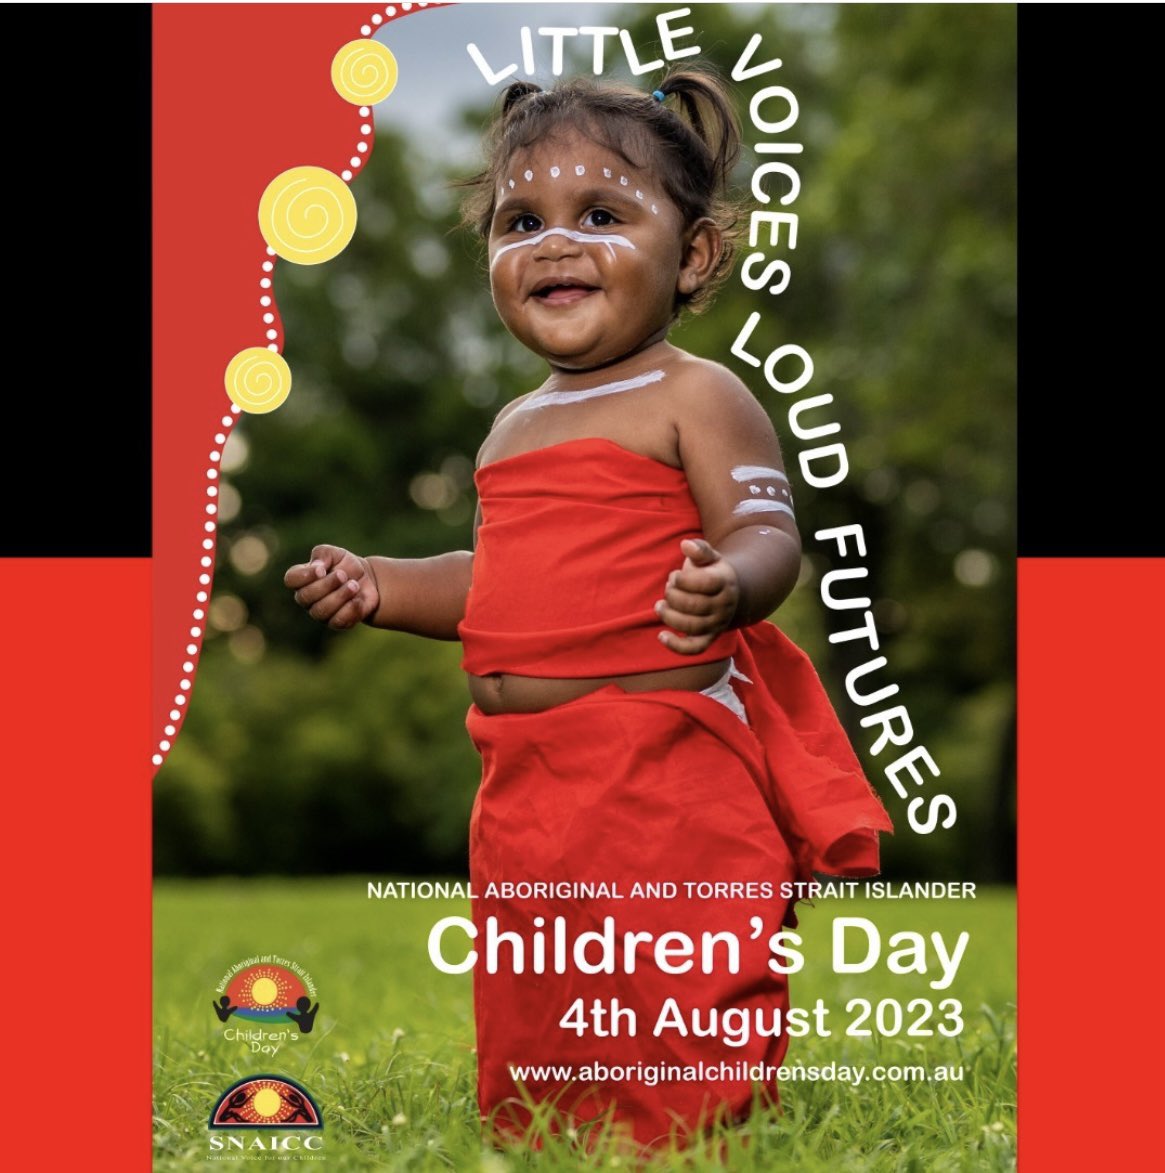 Today is National Aboriginal and Torres Strait Islander Children’s Day, which aims to amplify the voices of First Nations children and their needs across the country. 

#littlevoicesloudfutures #littlevoices #loudfutures #nationalaboriginalandtorresstraitislanderchildrensday